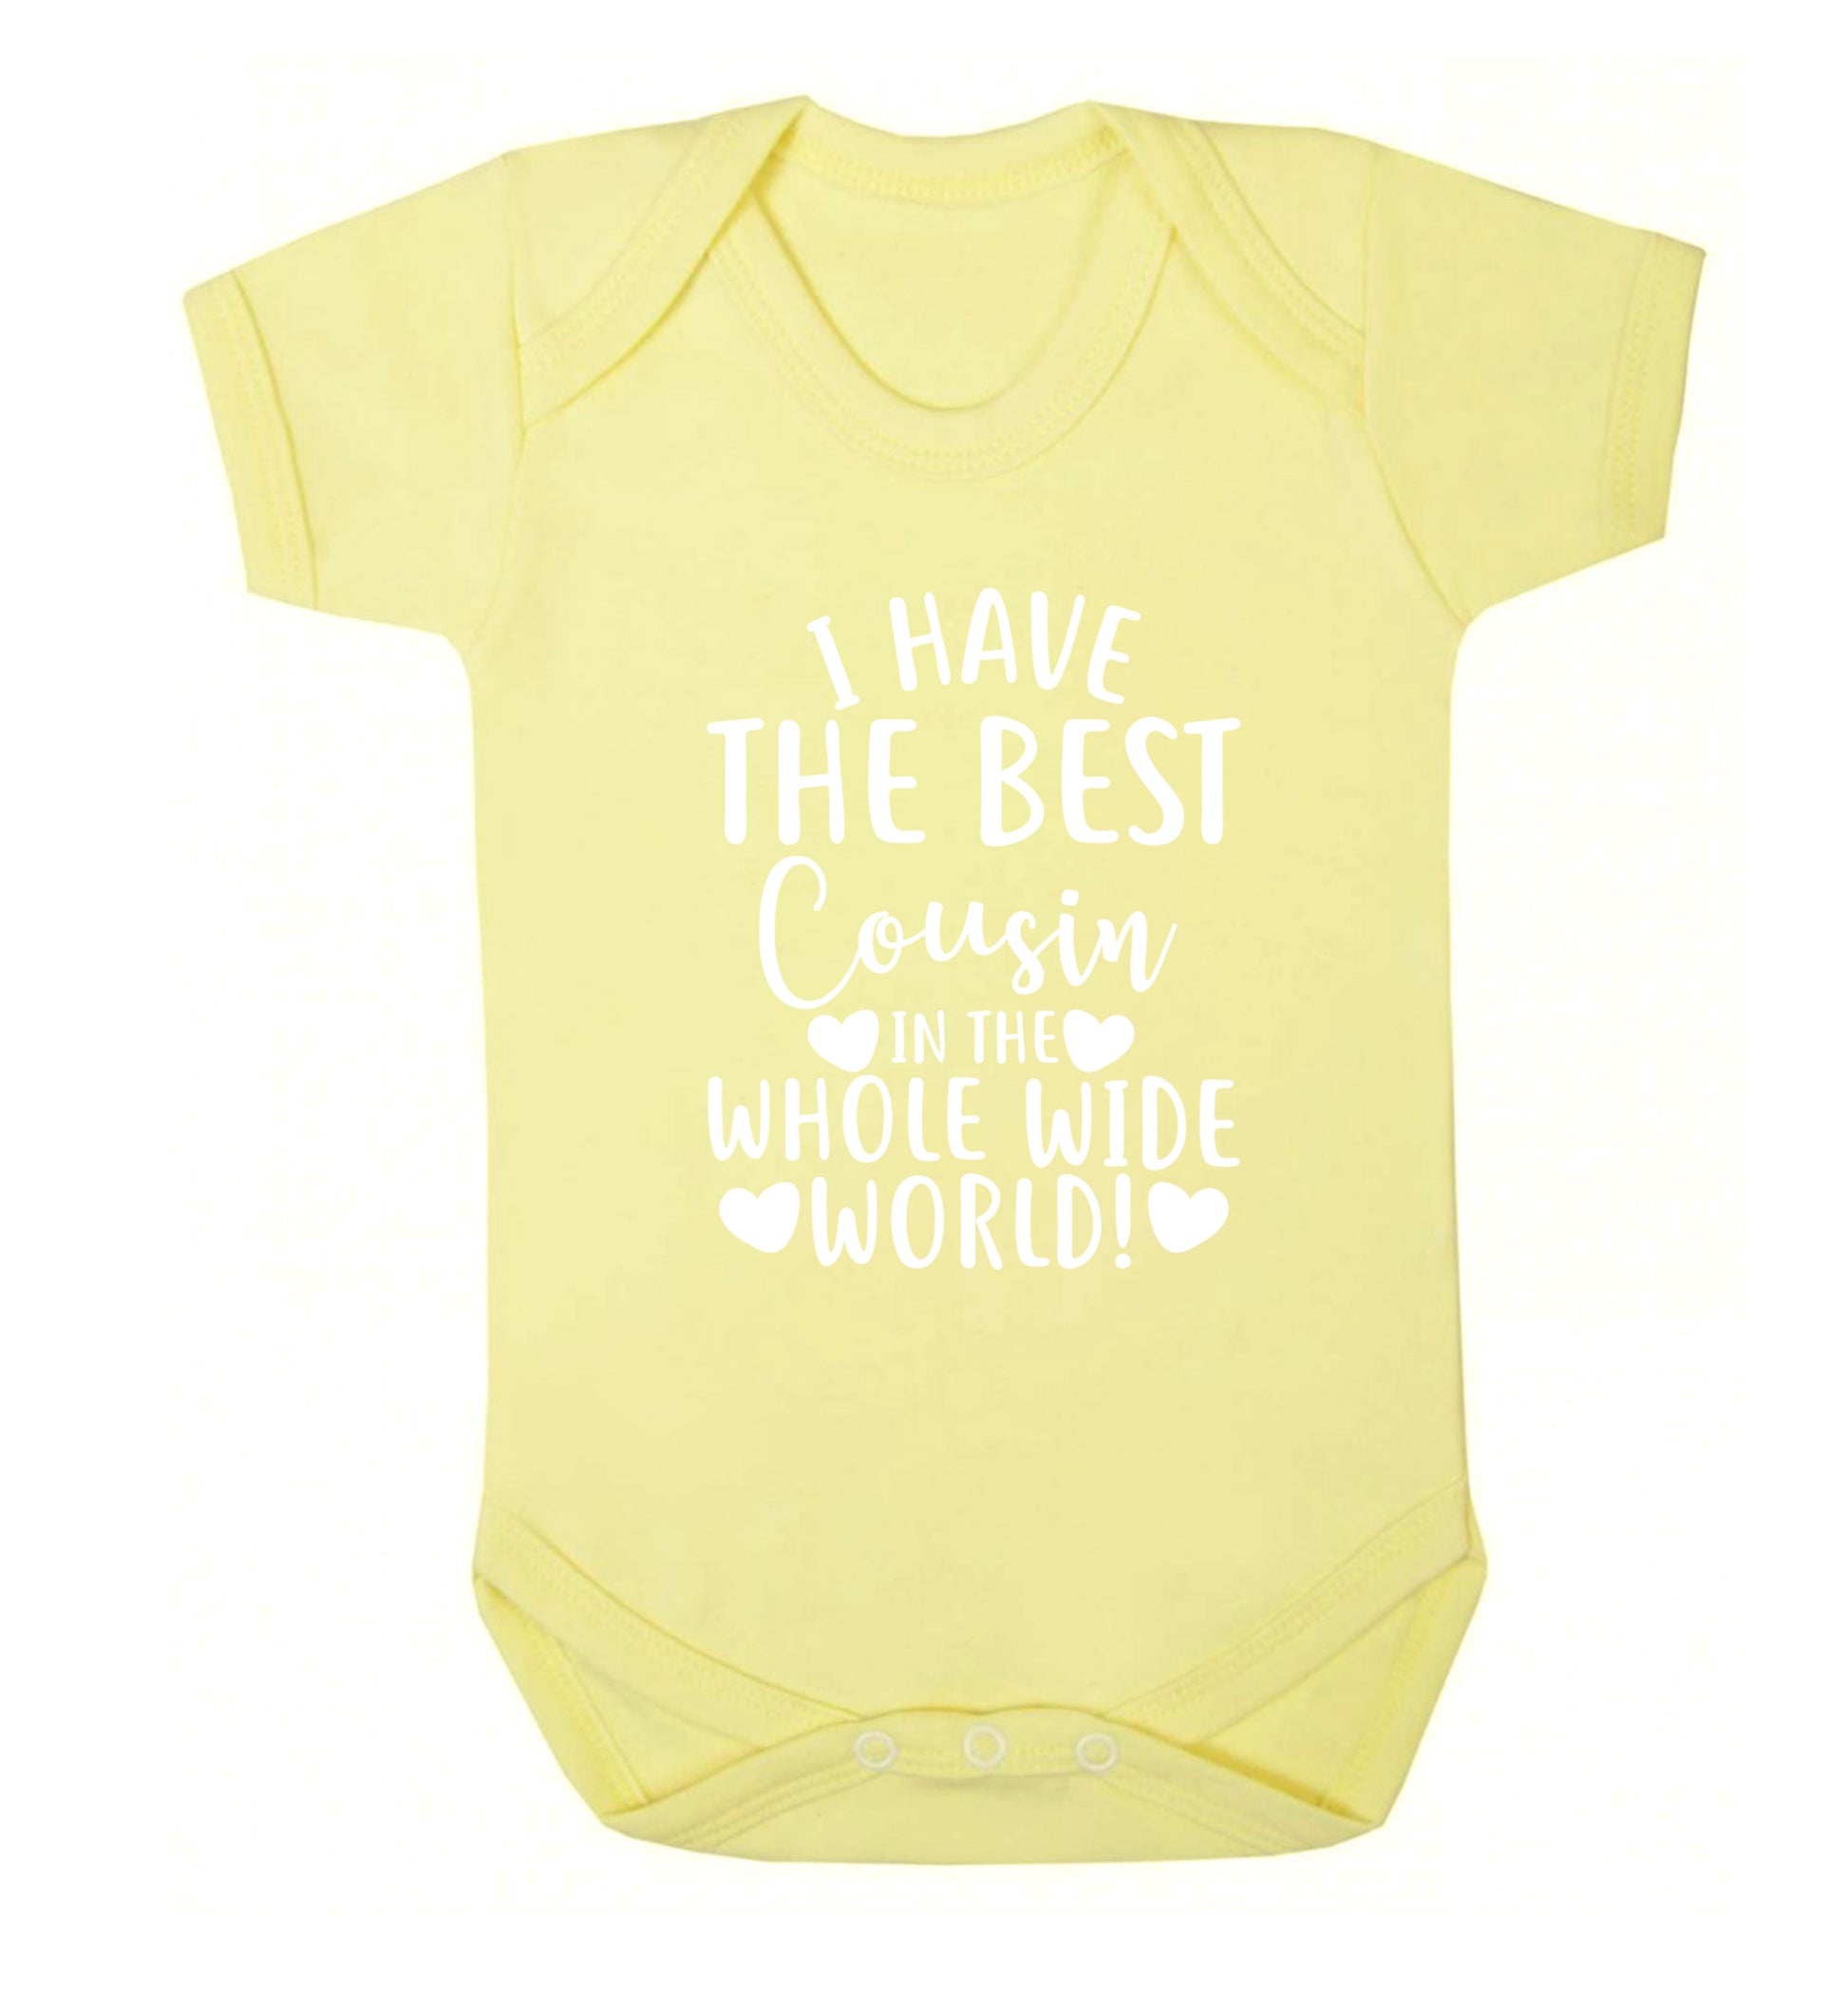 I have the best cousin in the whole wide world! Baby Vest pale yellow 18-24 months